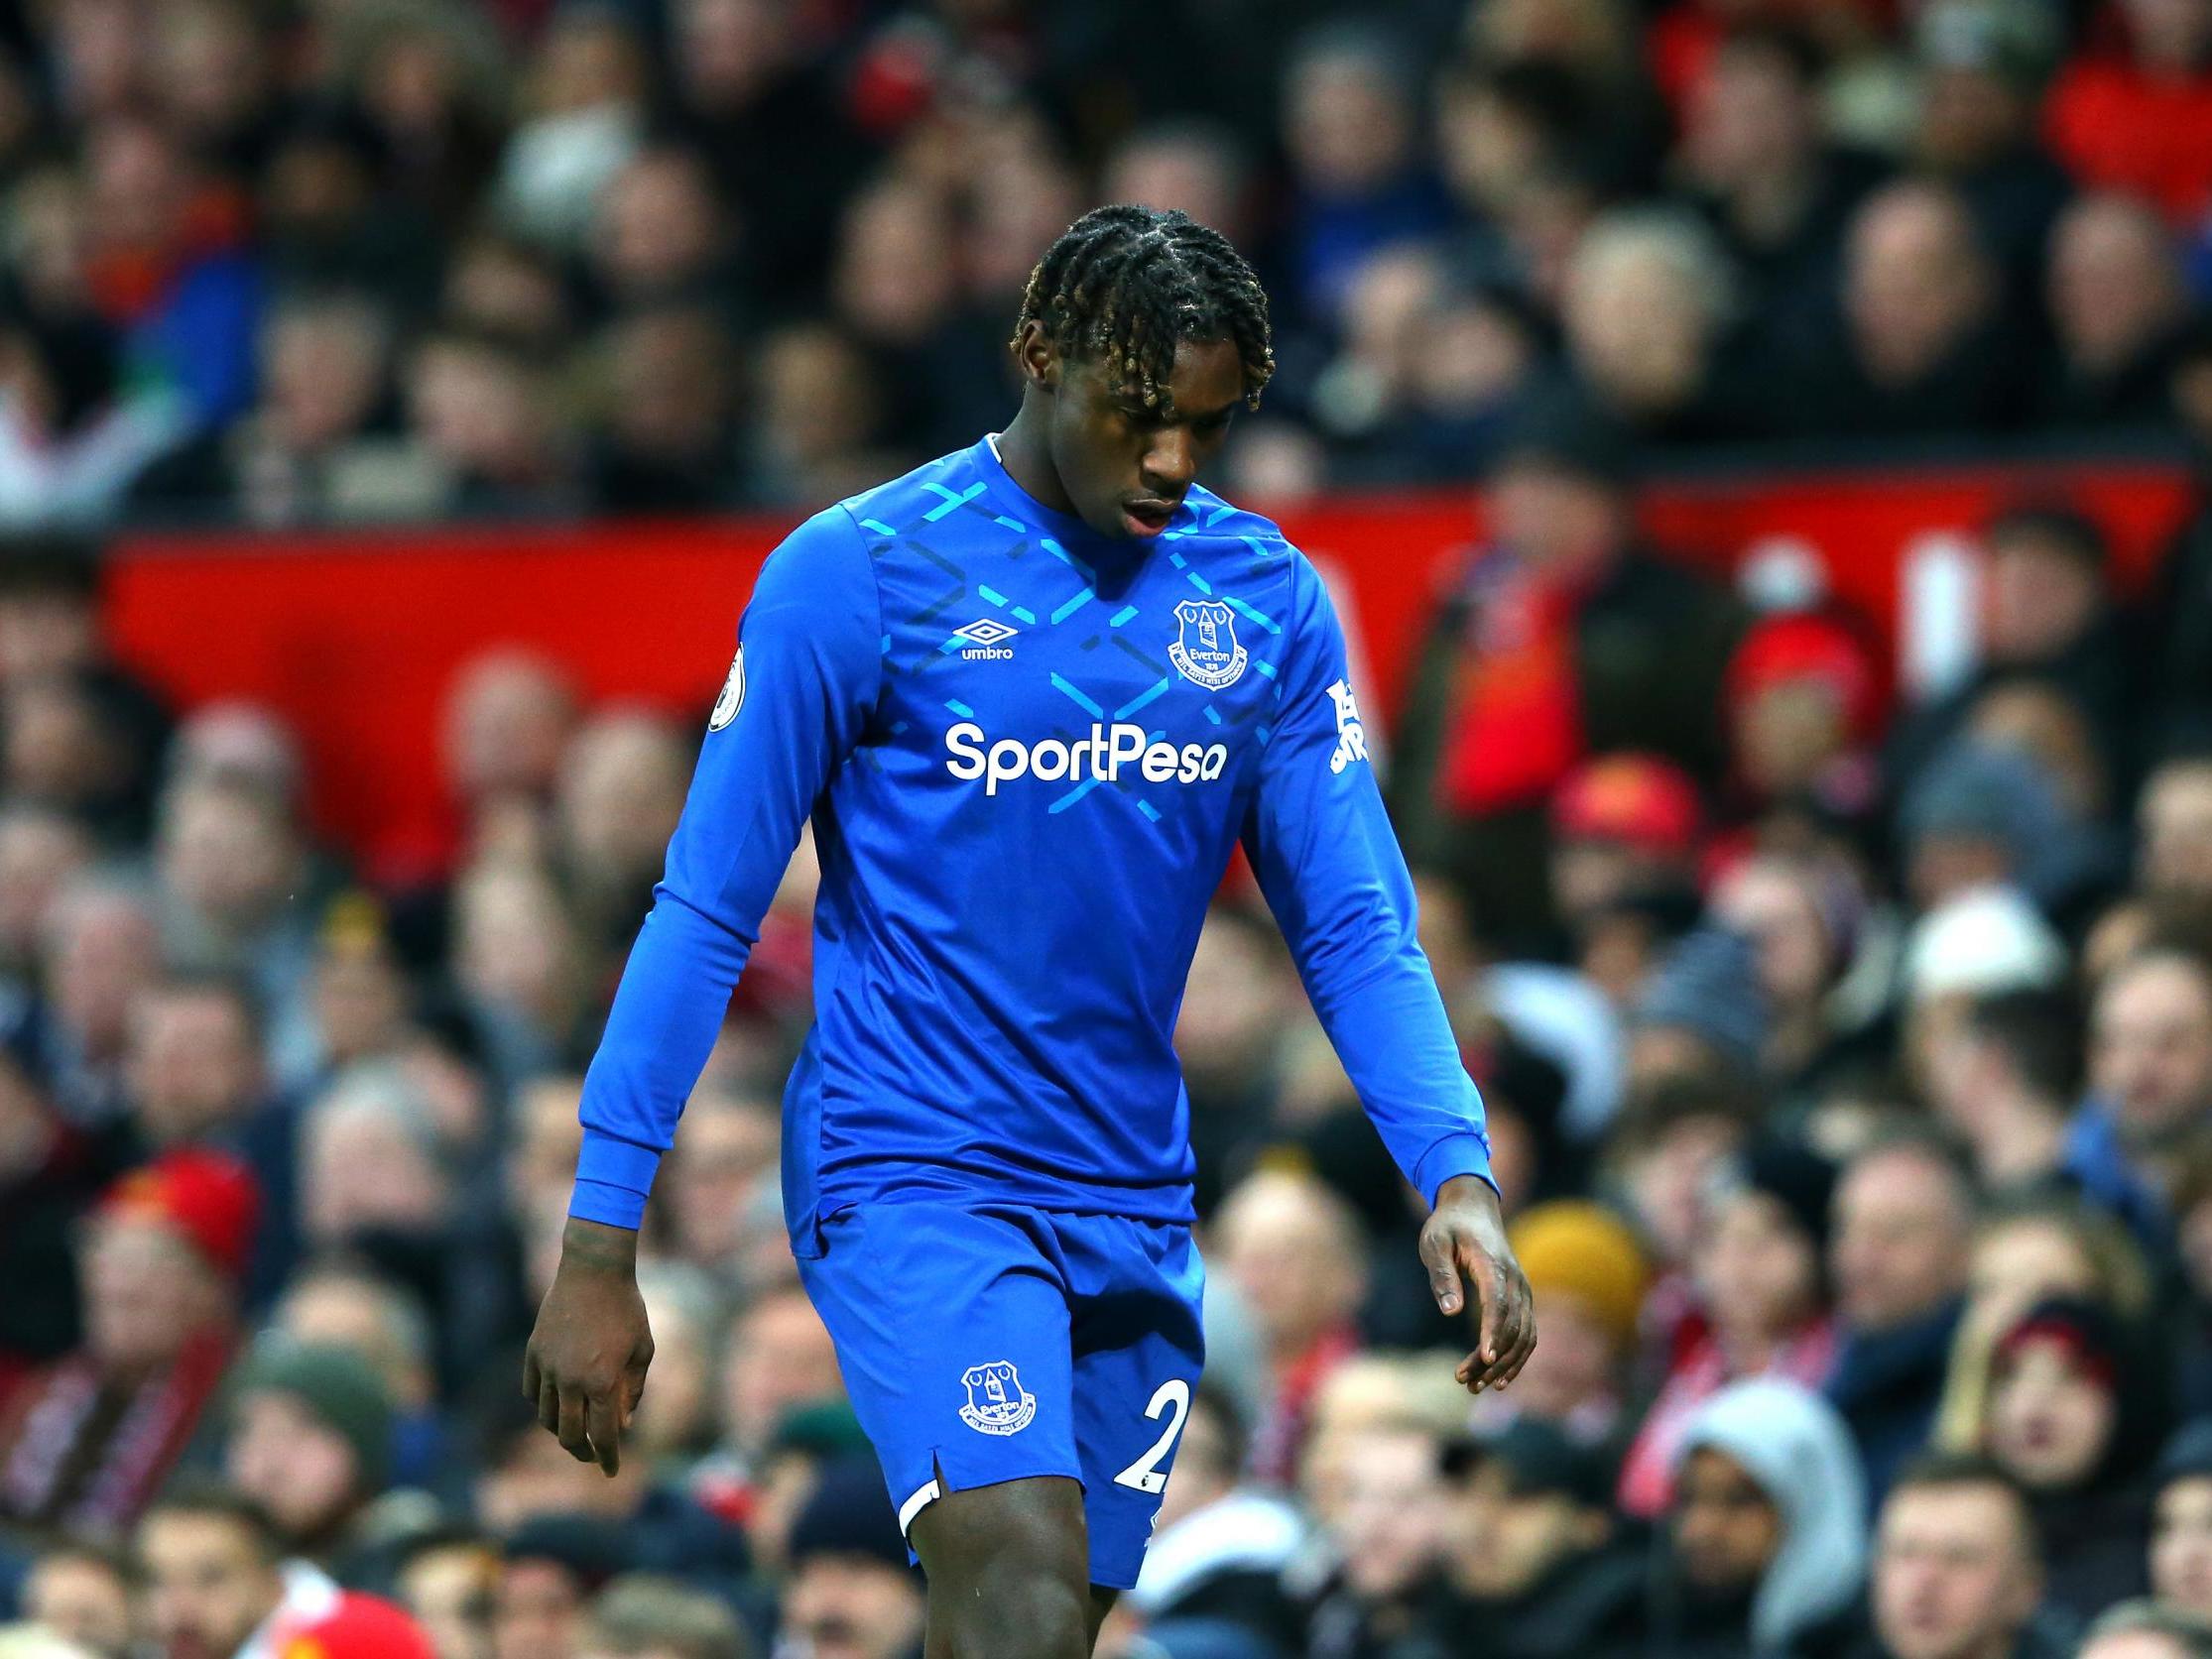 Moise Kean has failed to deliver so far at Everton (Getty)